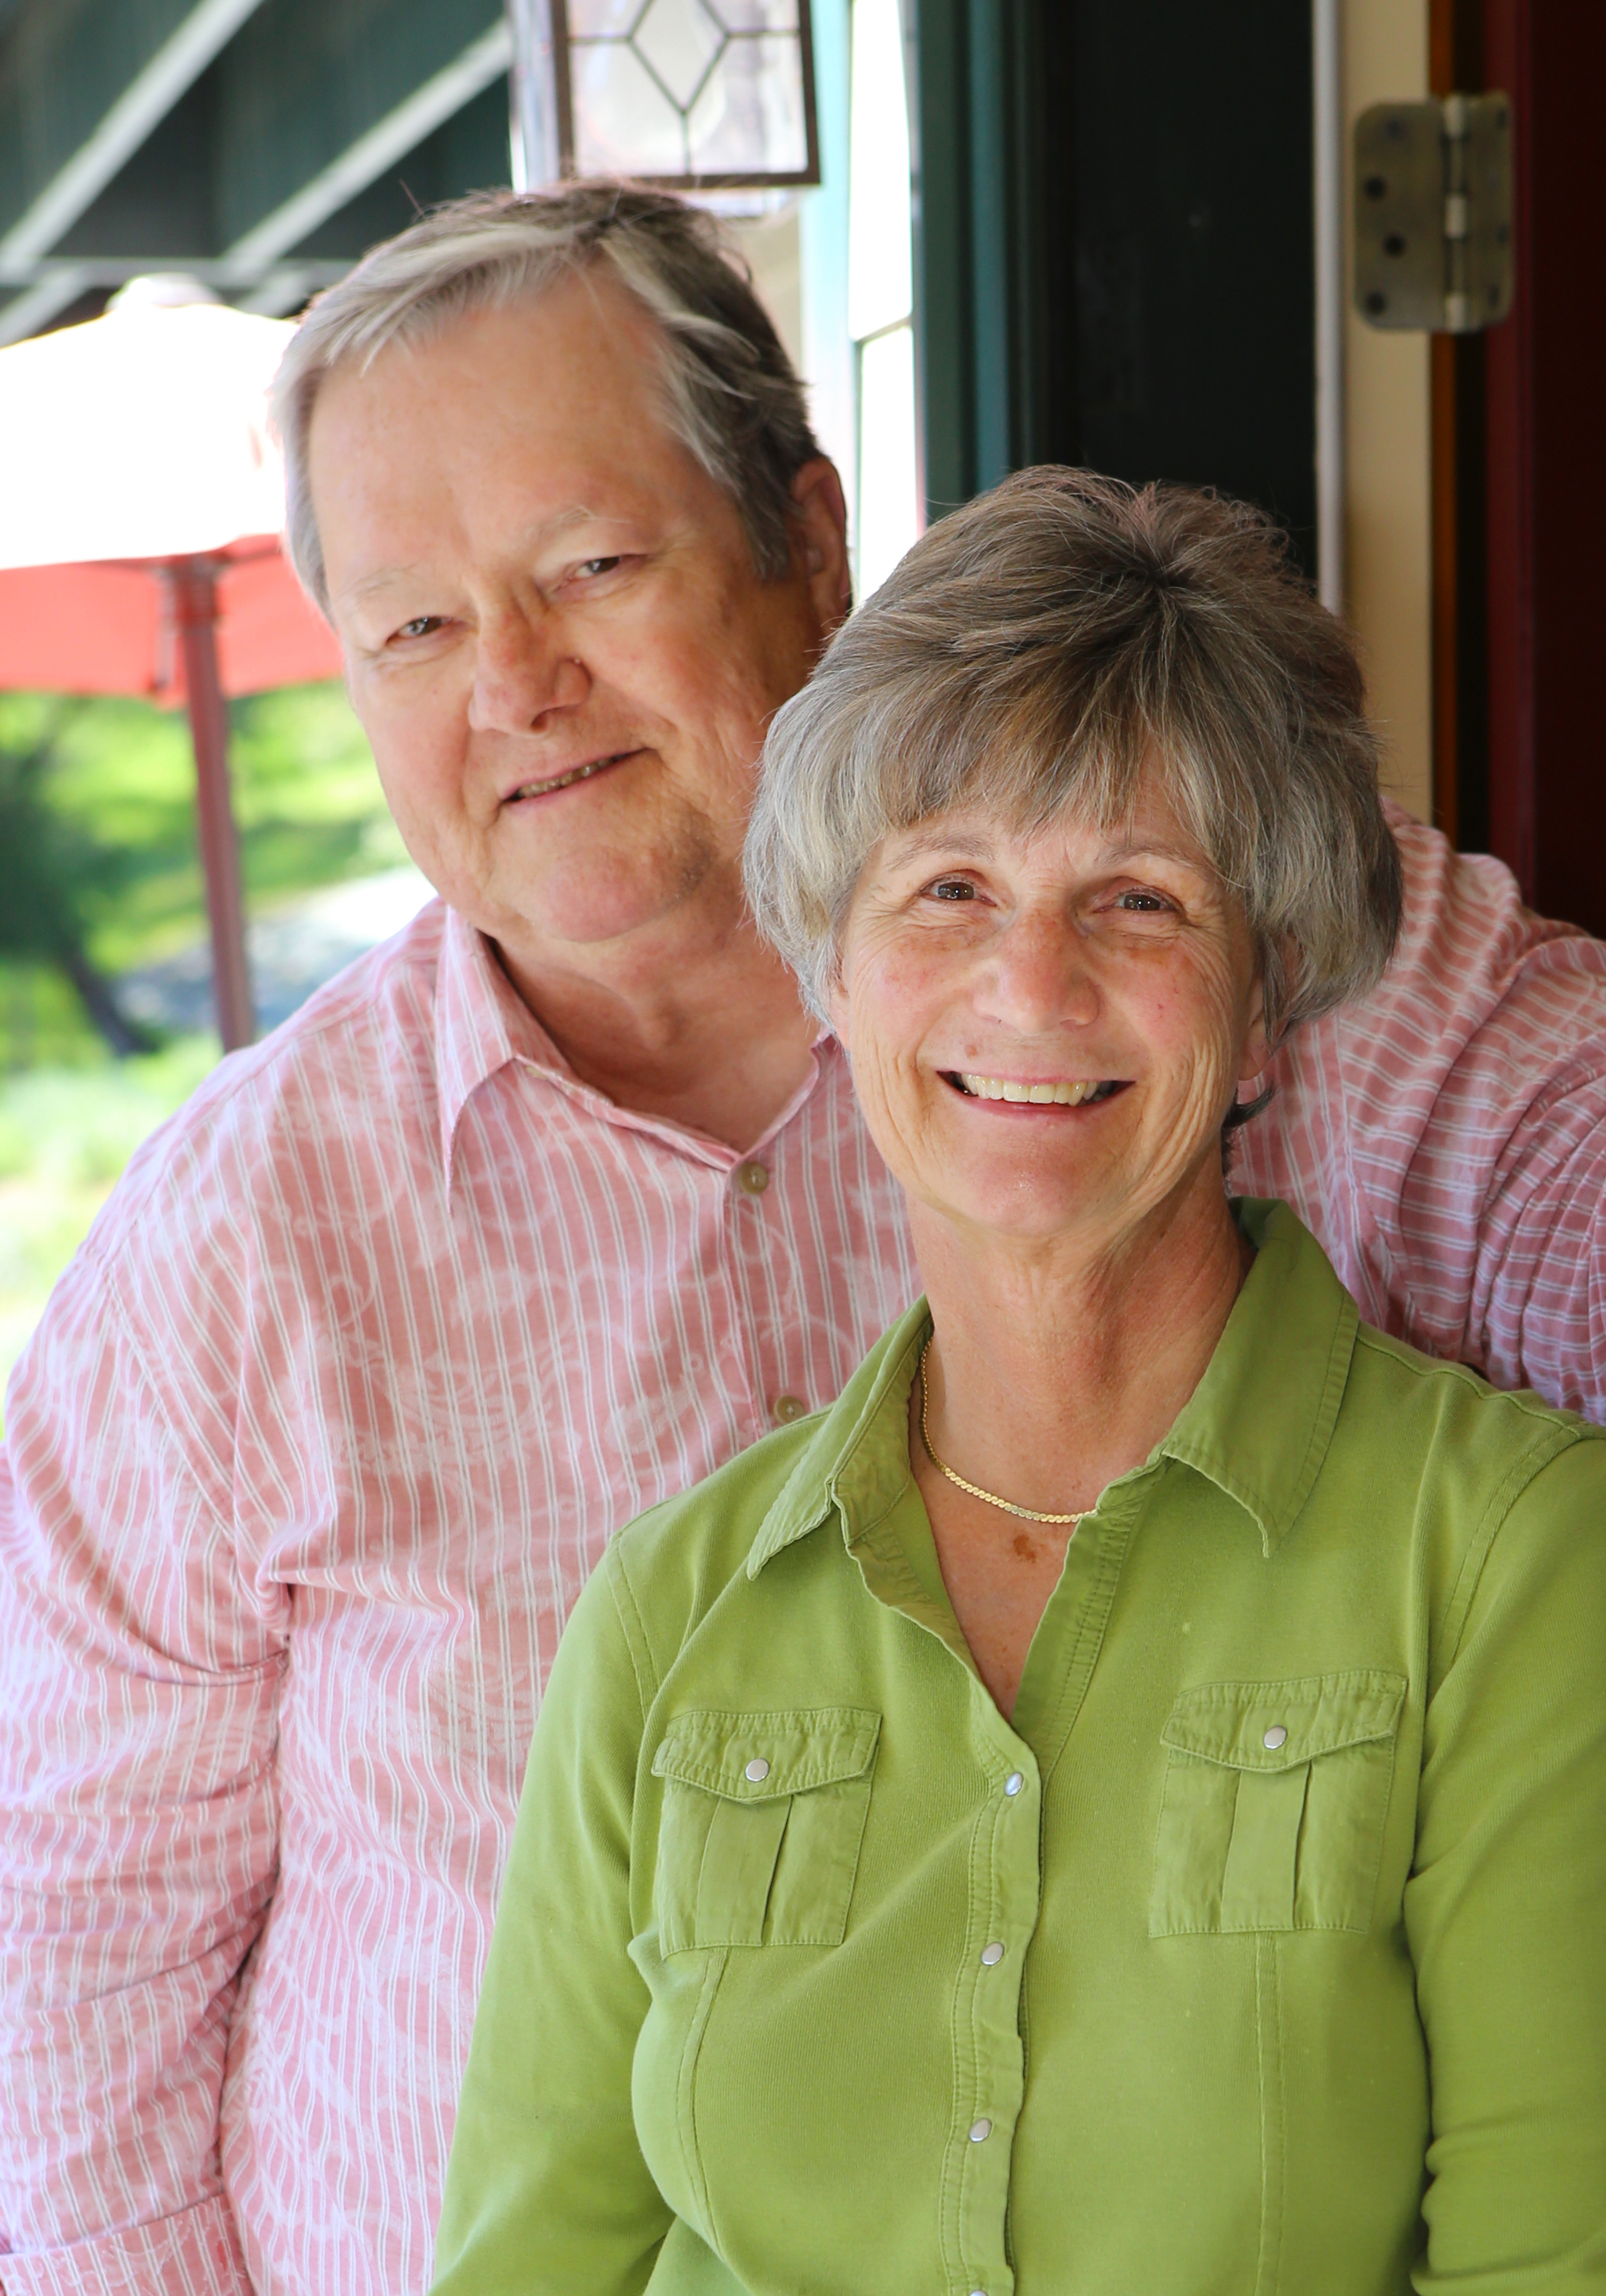 Lucinda and Daryl Sullivan, the Innkeepers, smiling, she in a green blouse, he in a pink and white striped shirt.